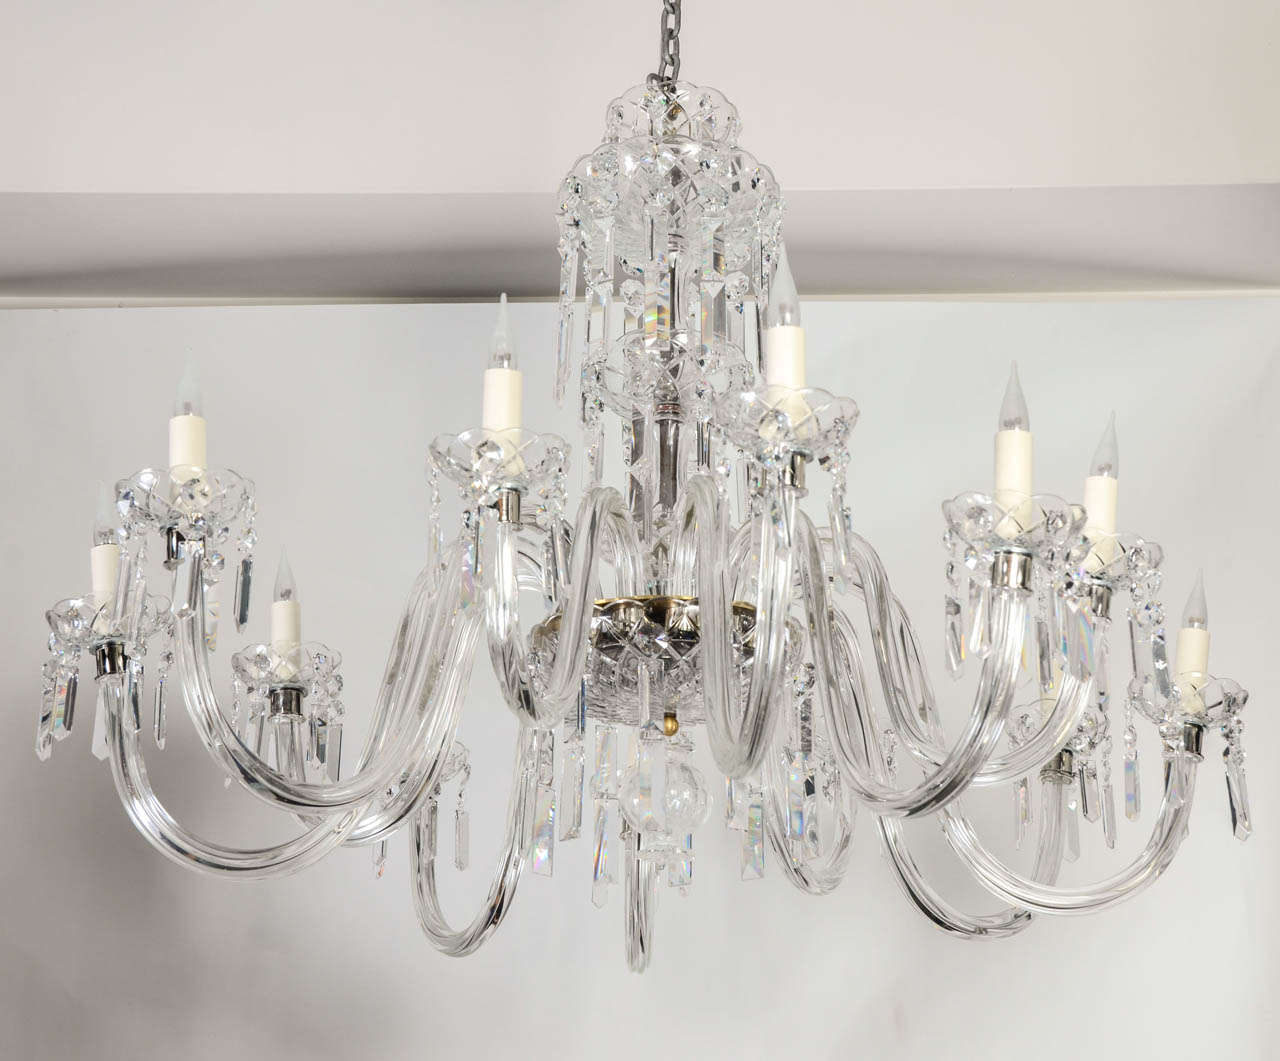 Beautiful 12 lights crystal chandelier.
This chandelier could be fitted with E10 sockets at no extra charge.